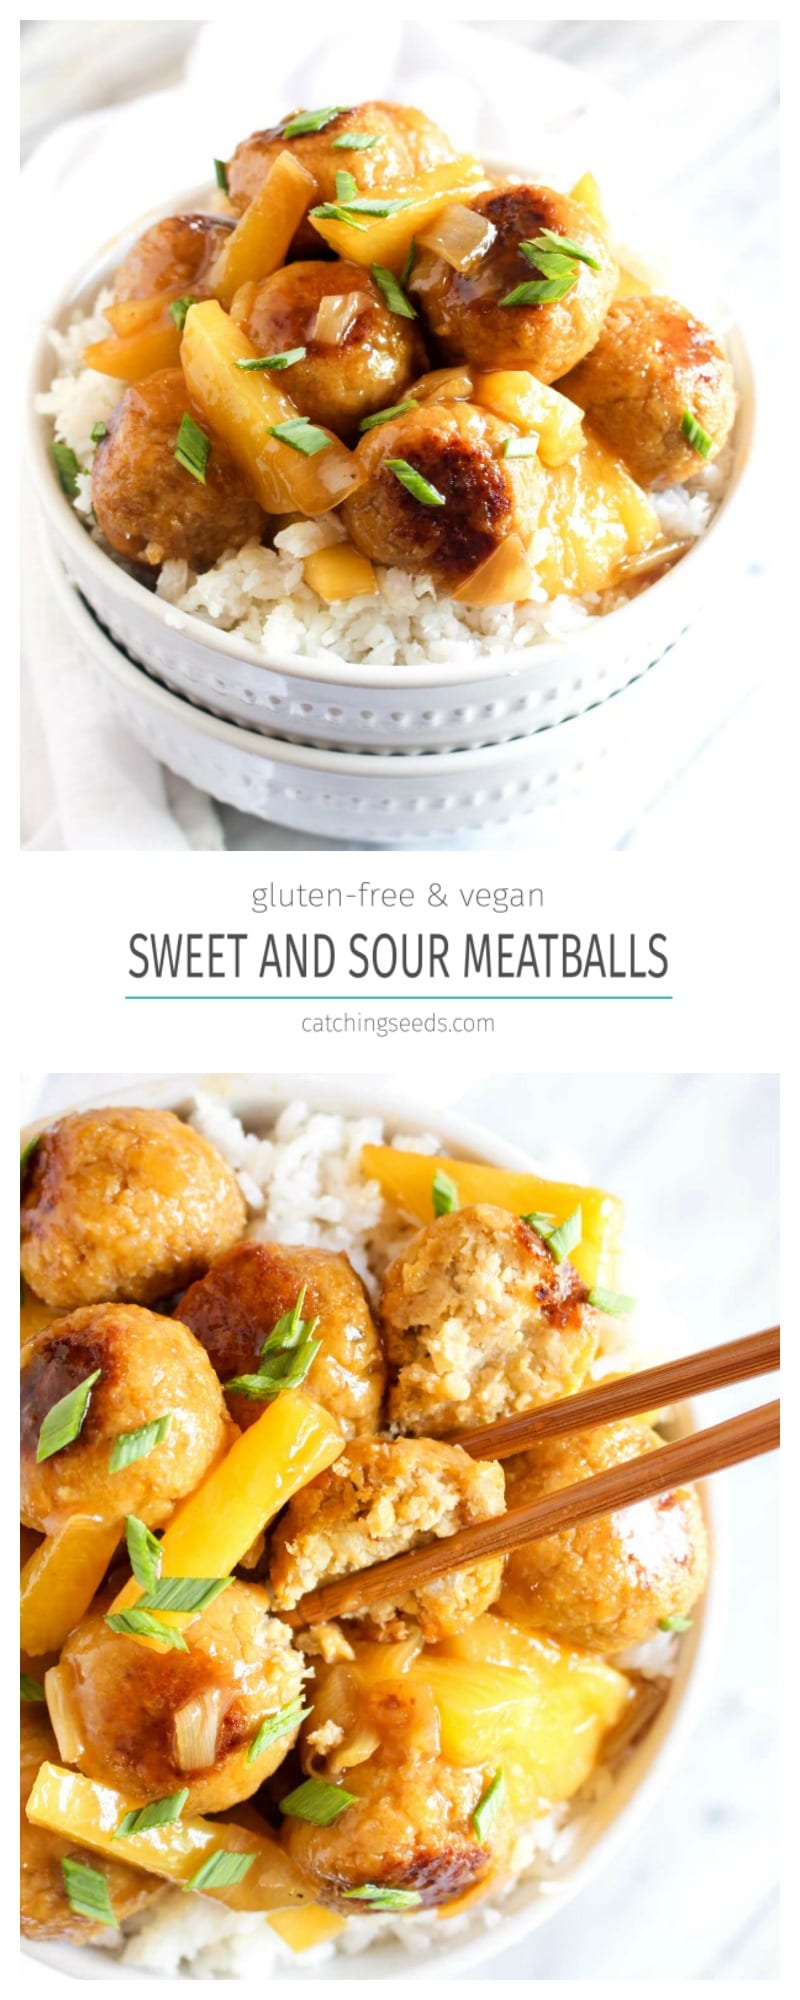 These Sweet and Sour Tempeh Meatballs are served on a bed of fragrant coconut rice and coated in a deliciously sticky sauce. This healthy vegan and gluten free dish is jam packed with flavor.  | CatchingSeeds.com